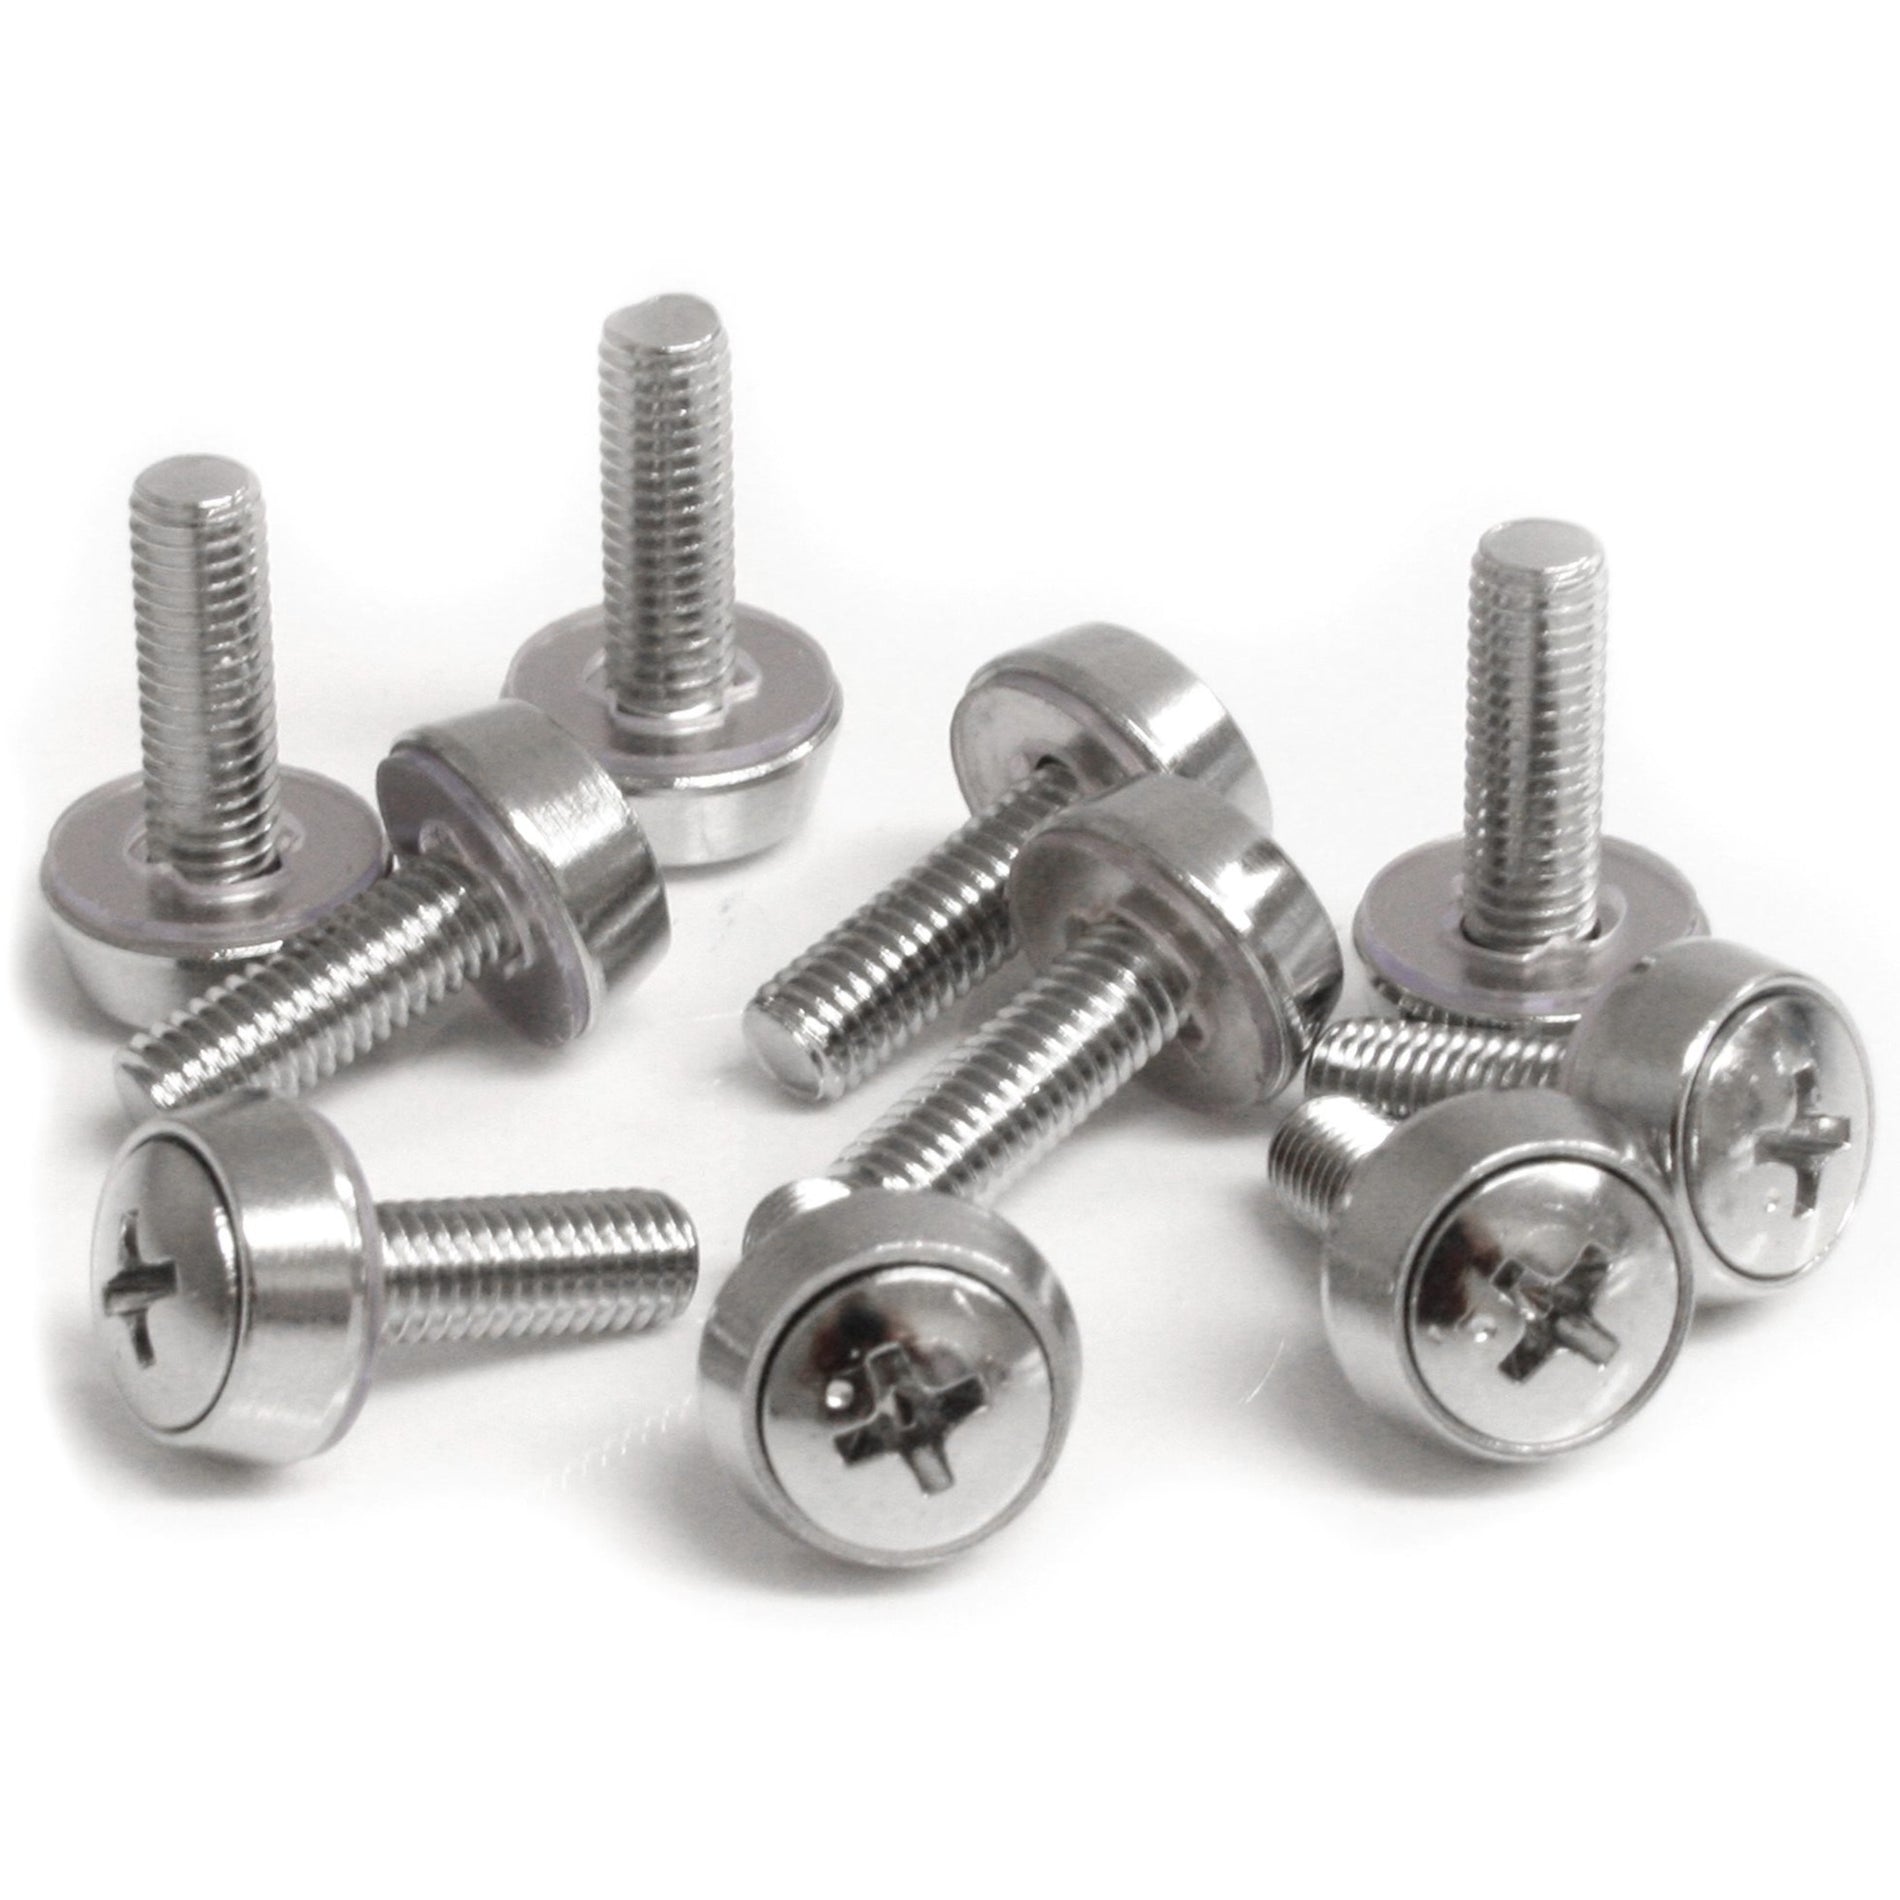 StarTech.com CABSCREWSM5 M5 x 12mm Mounting Screws - 100 Pack, Rust Resistant, Nickel Plated